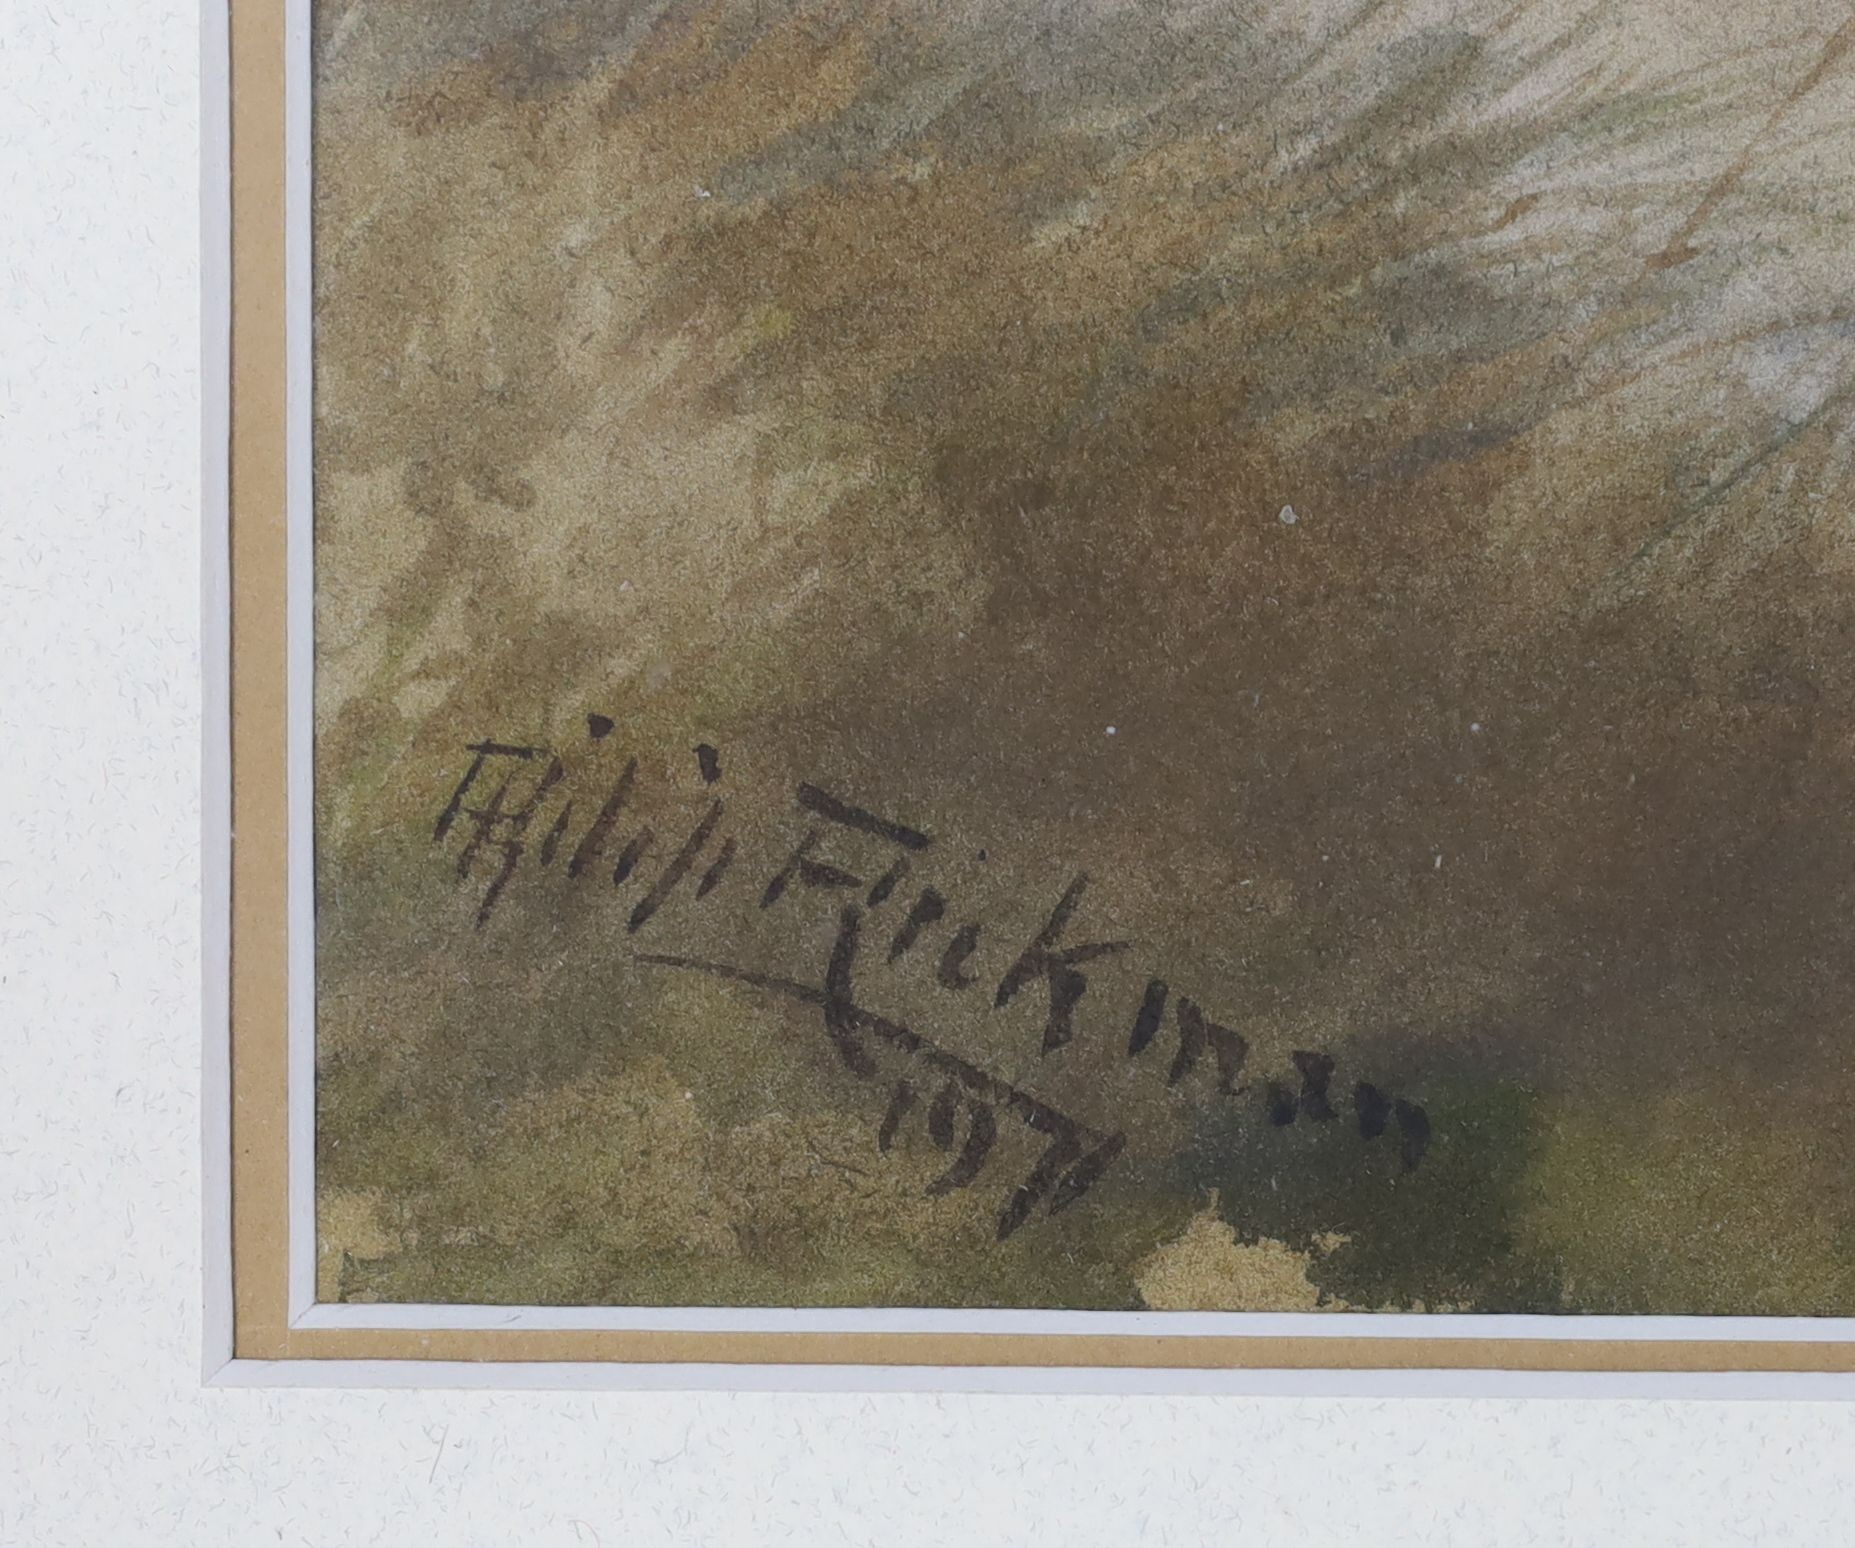 Philip Rickman (1891-1982), watercolour and gouache, 'Evening', partridges in a landscape, signed and dated 1971, 51 x 37cm